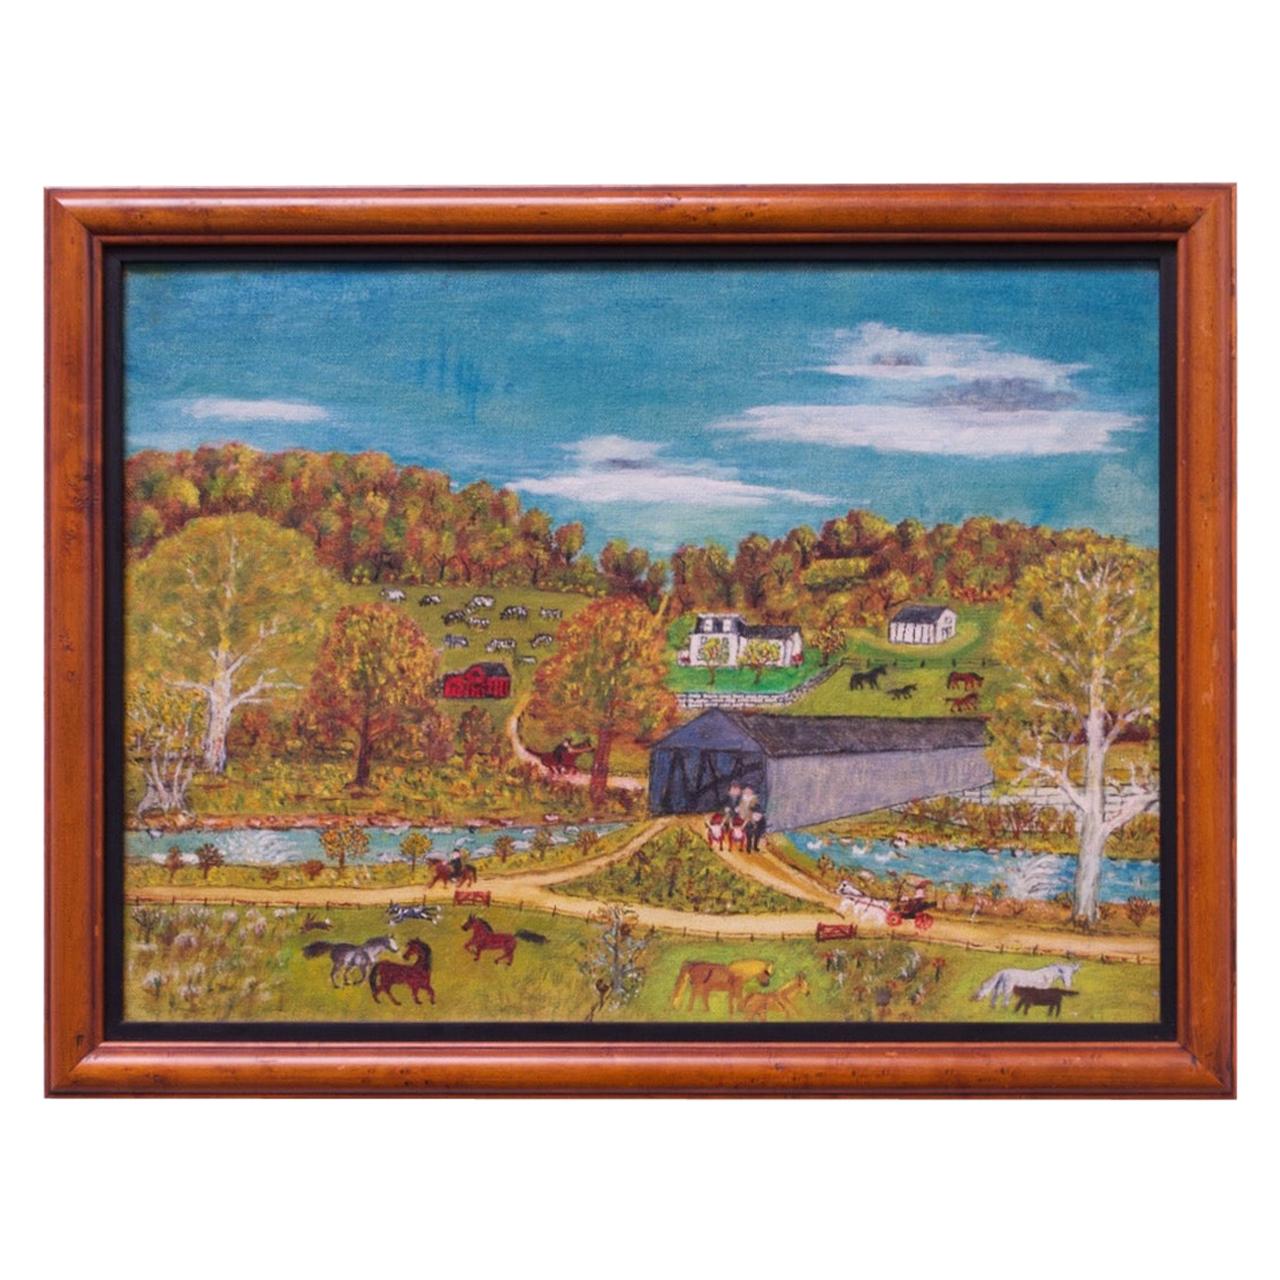 Mid-20th Century Amish Pastoral Scene Oil on Canvas by Harvey Milligan